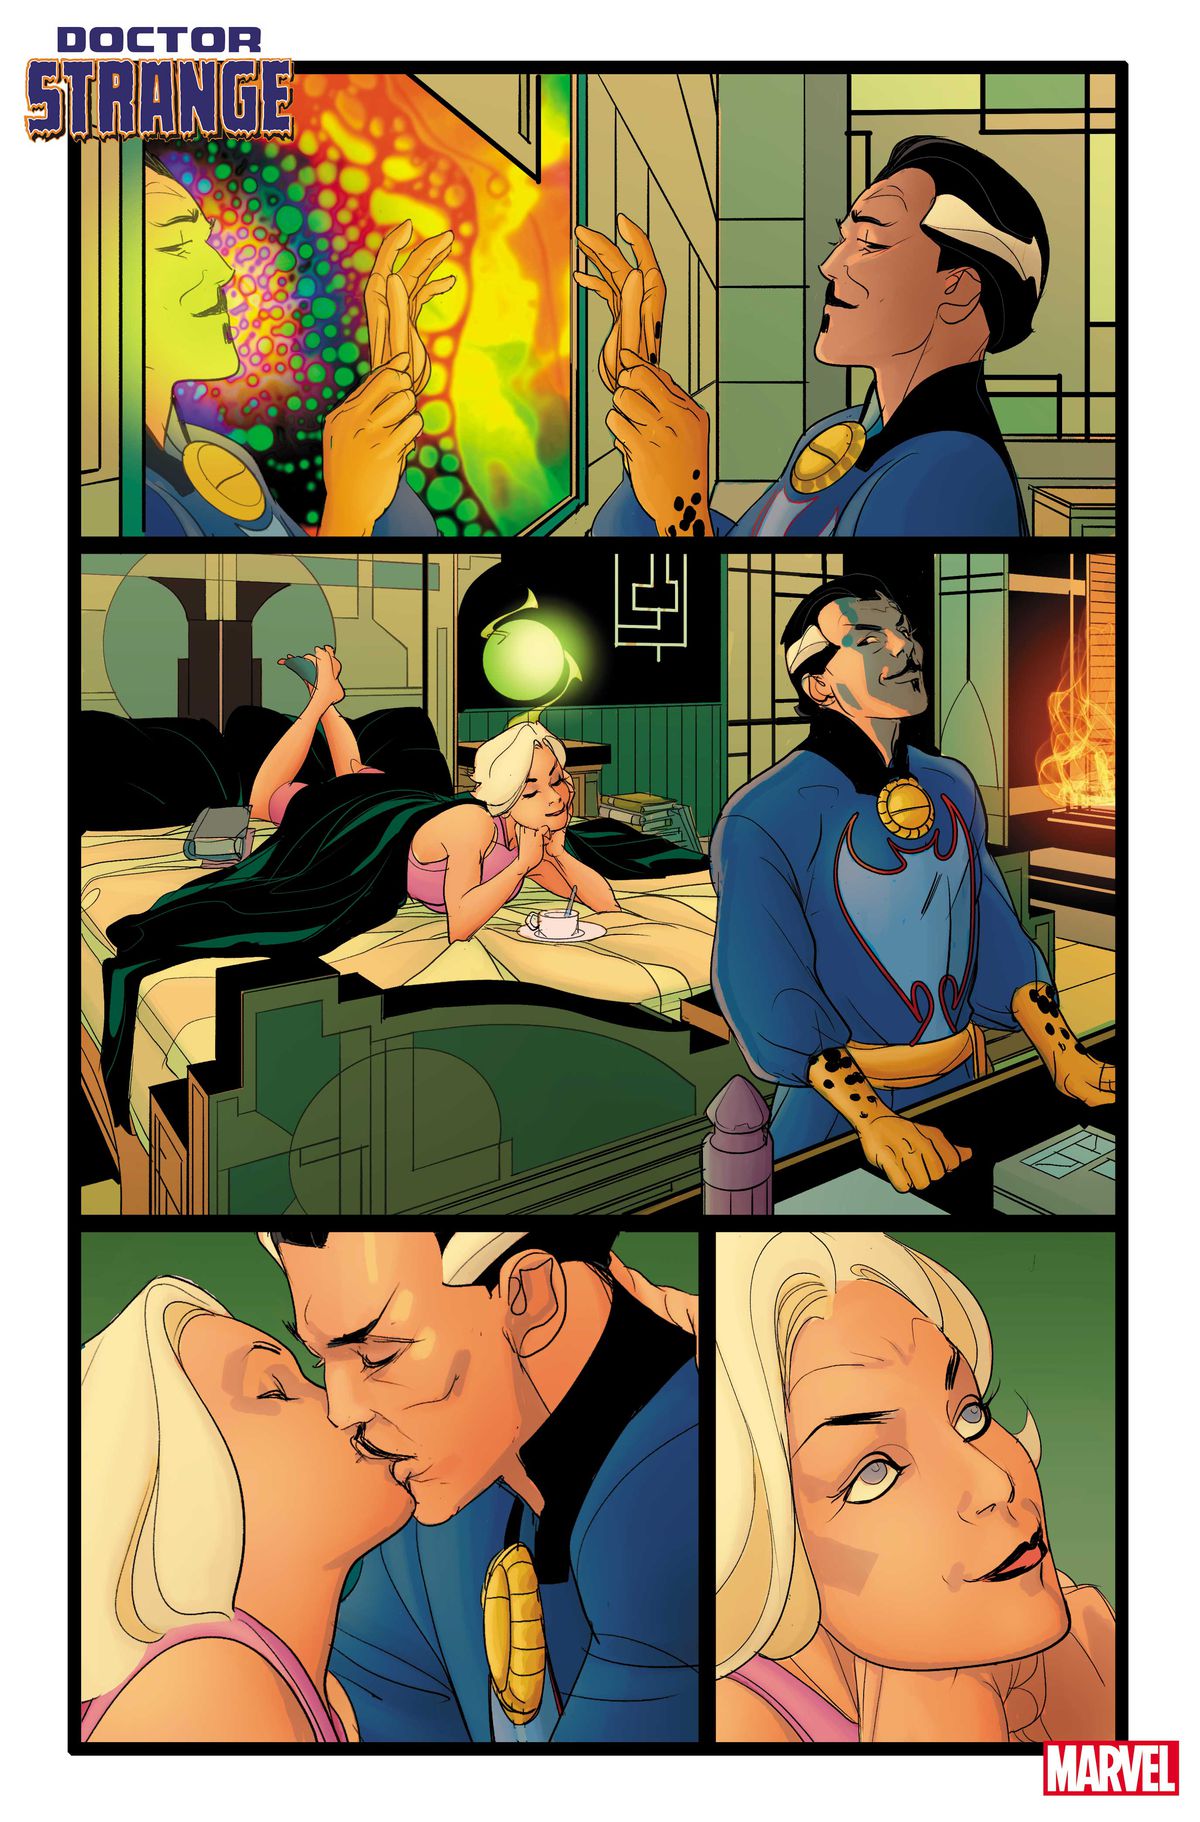 Doctor Strange and Clea lounge in their bedroom and share a kiss in Doctor Strange #1 (2023).